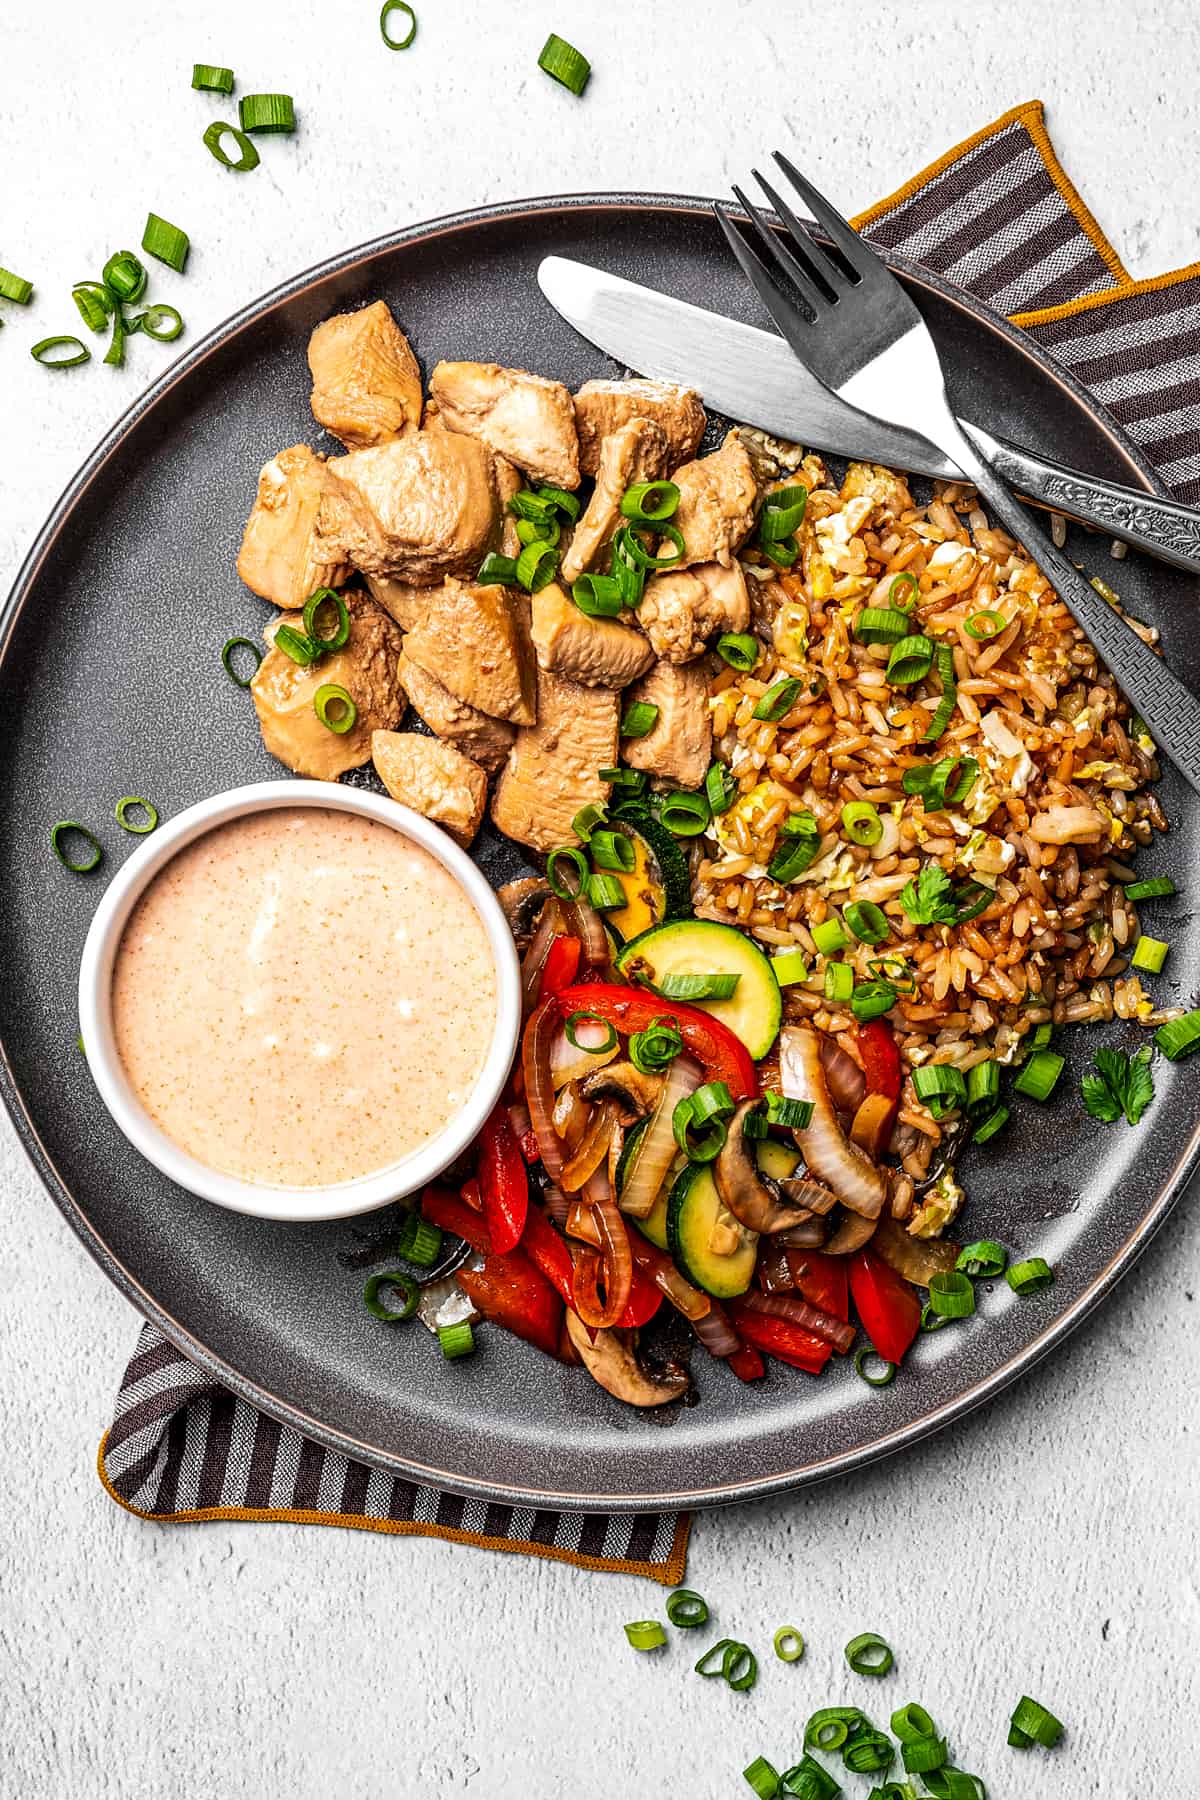 A plate with Hibachi chicken fried rice and veggies